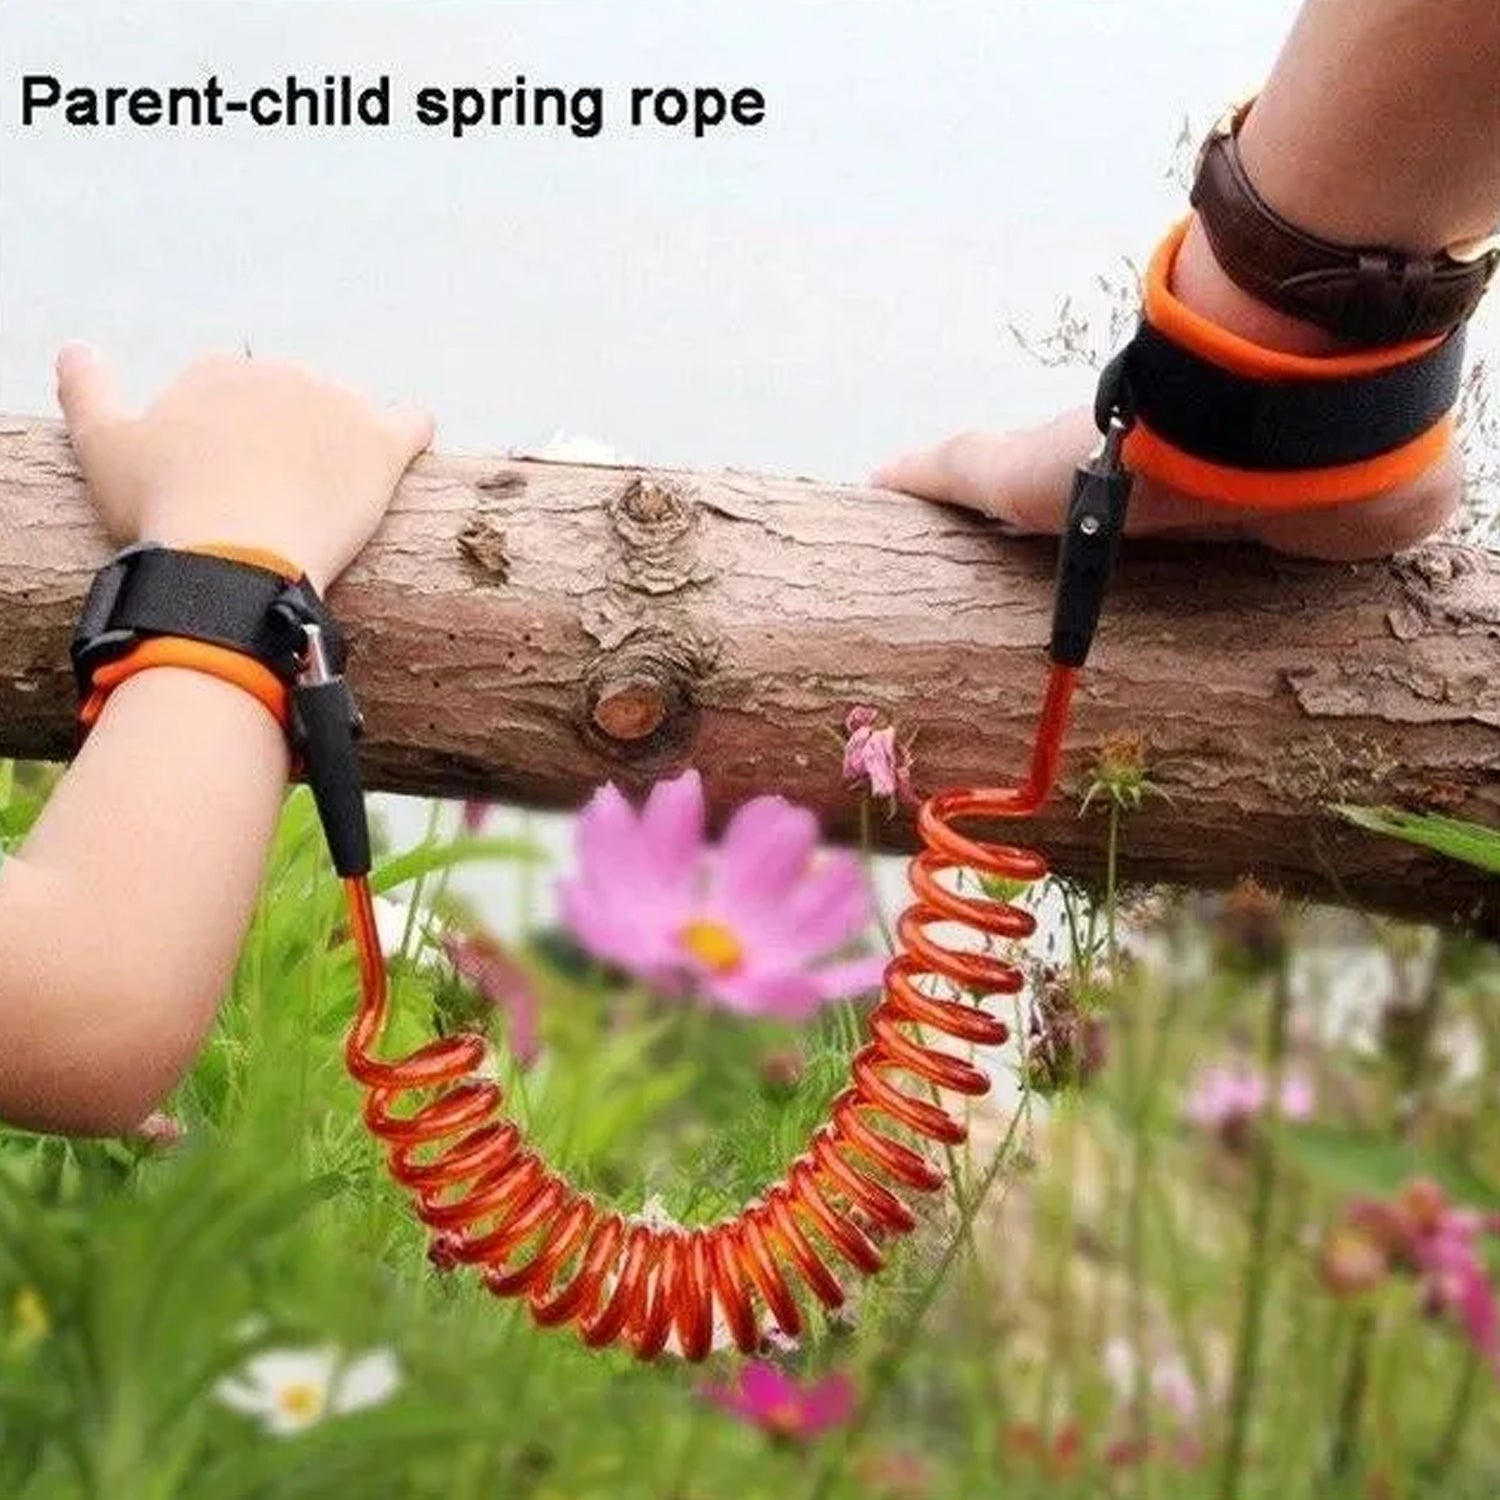 0369 Baby Child Anti Lost Safety Wrist Link Harness Strap Rope Leash Walking Hand Belt for Toddlers Kids DeoDap